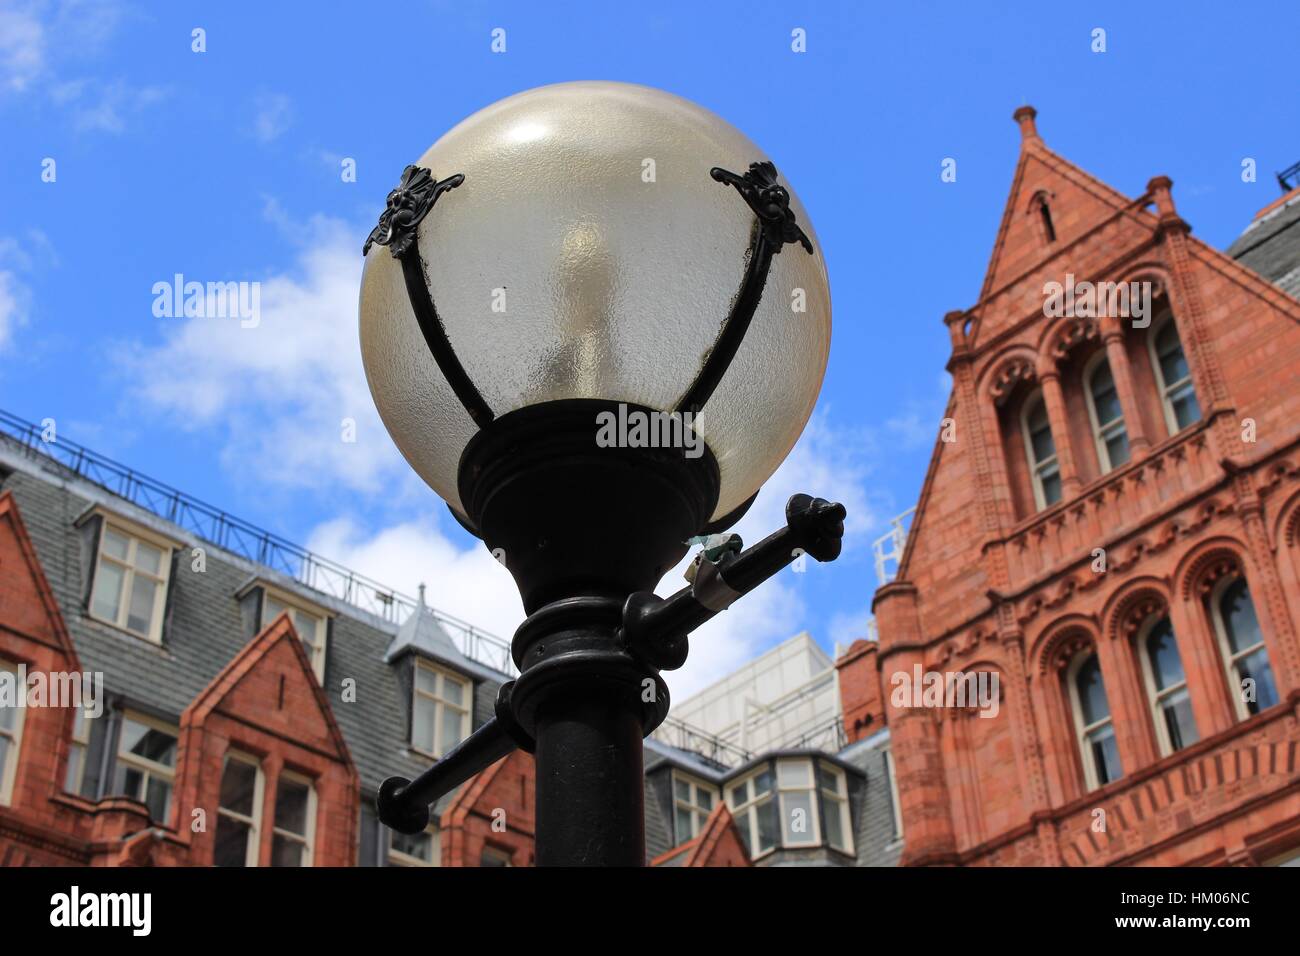 Lamp post in the courtyard of Waterhouse Square, London, on a bright sunny day. July 2016 Stock Photo